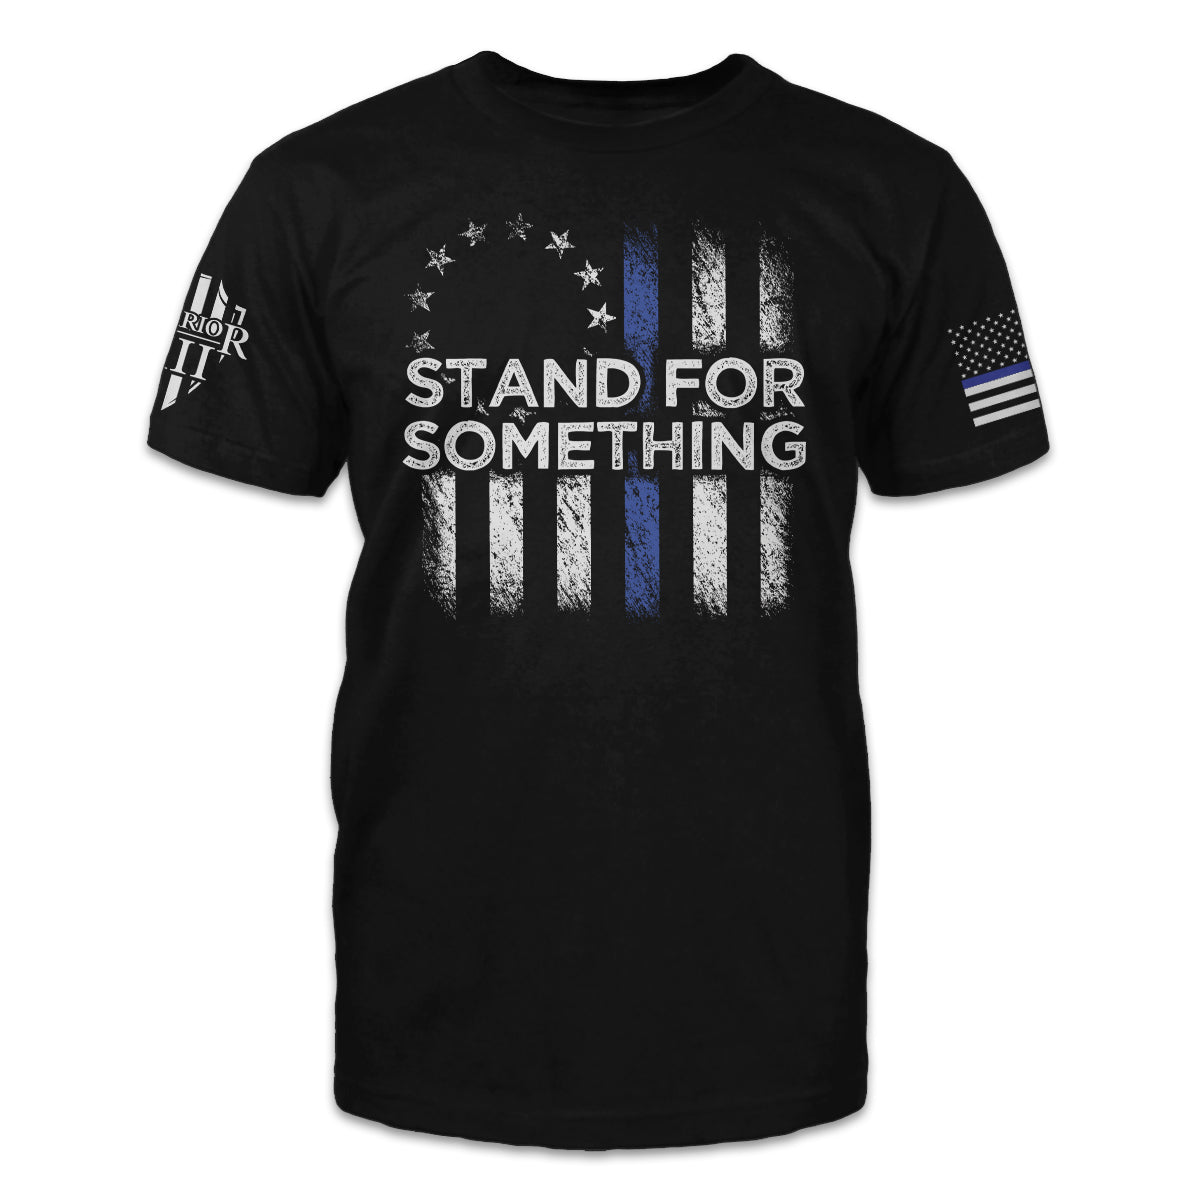 A black t-shirt with the words "Stand For Something" printed on the front of the shirt.